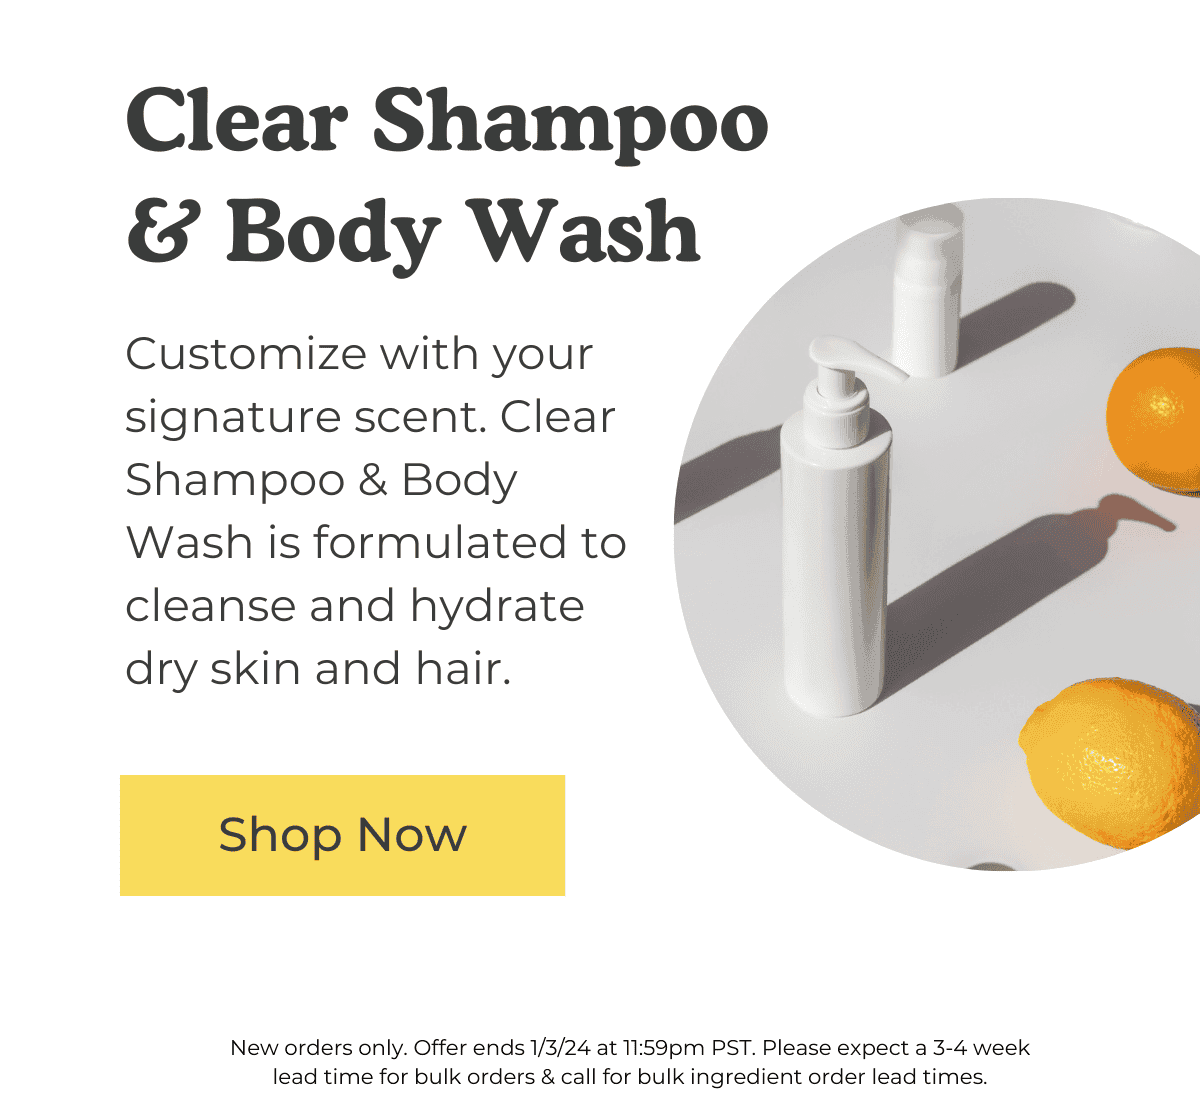 Clear Shampoo & Body Wash: Customize with your signature scent. Clear Shampoo & Body Wash is formulated to cleanse and hydrate dry skin and hair. SHOP NOW. *New orders only. Offer ends 1/3/24 at 11:59pm PST. Please expect a 3-4 week lead time for bulk orders & call for bulk ingredient order lead times.